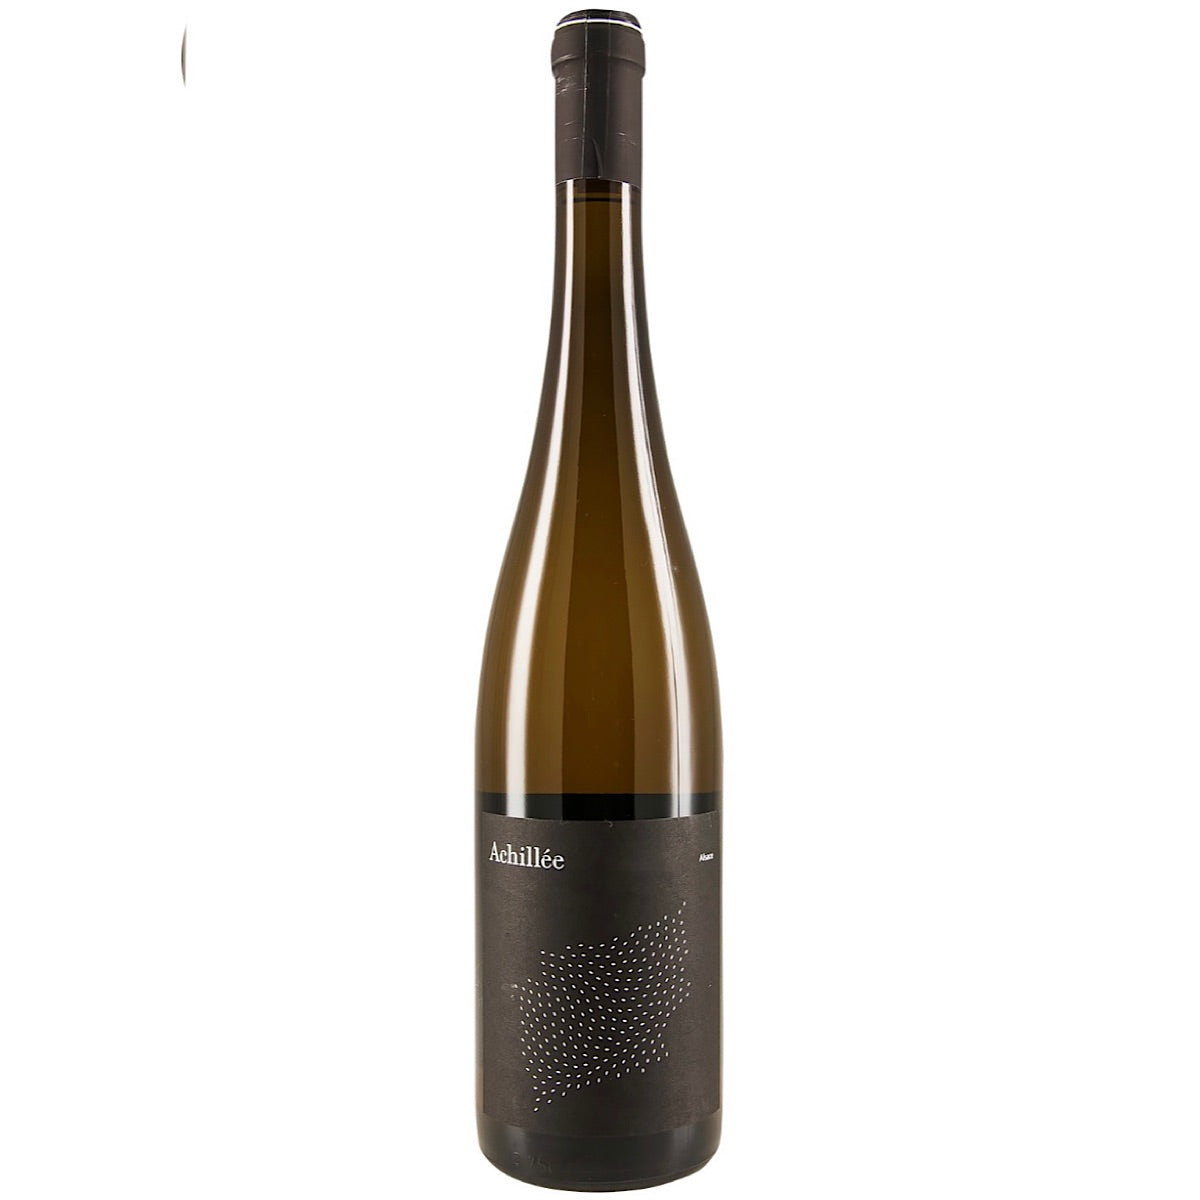 DOMAINE ACHILLEE, RIESLING HAHNENBERG, 6 Bottle Case 75cl